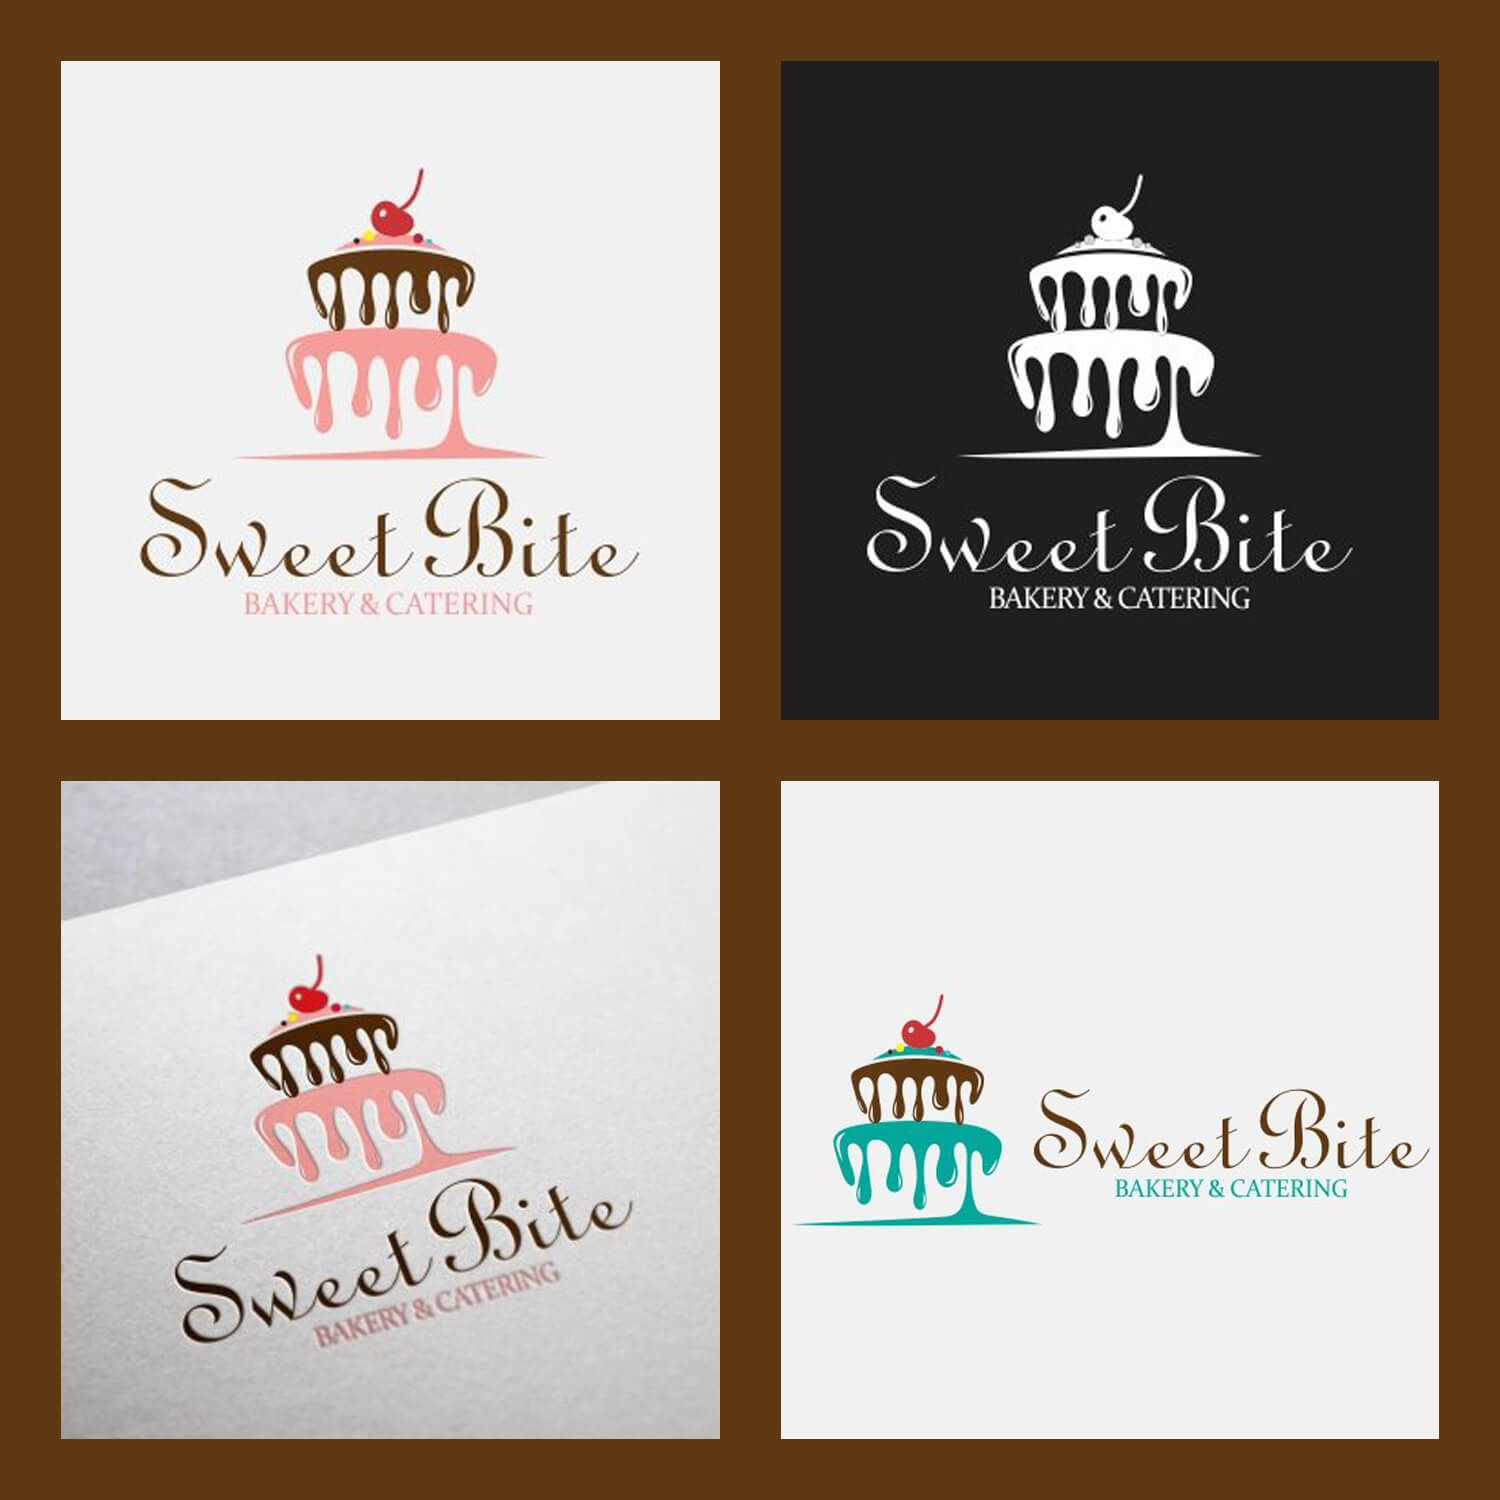 Light and black "Sweet Bite" logos in square brown frames.